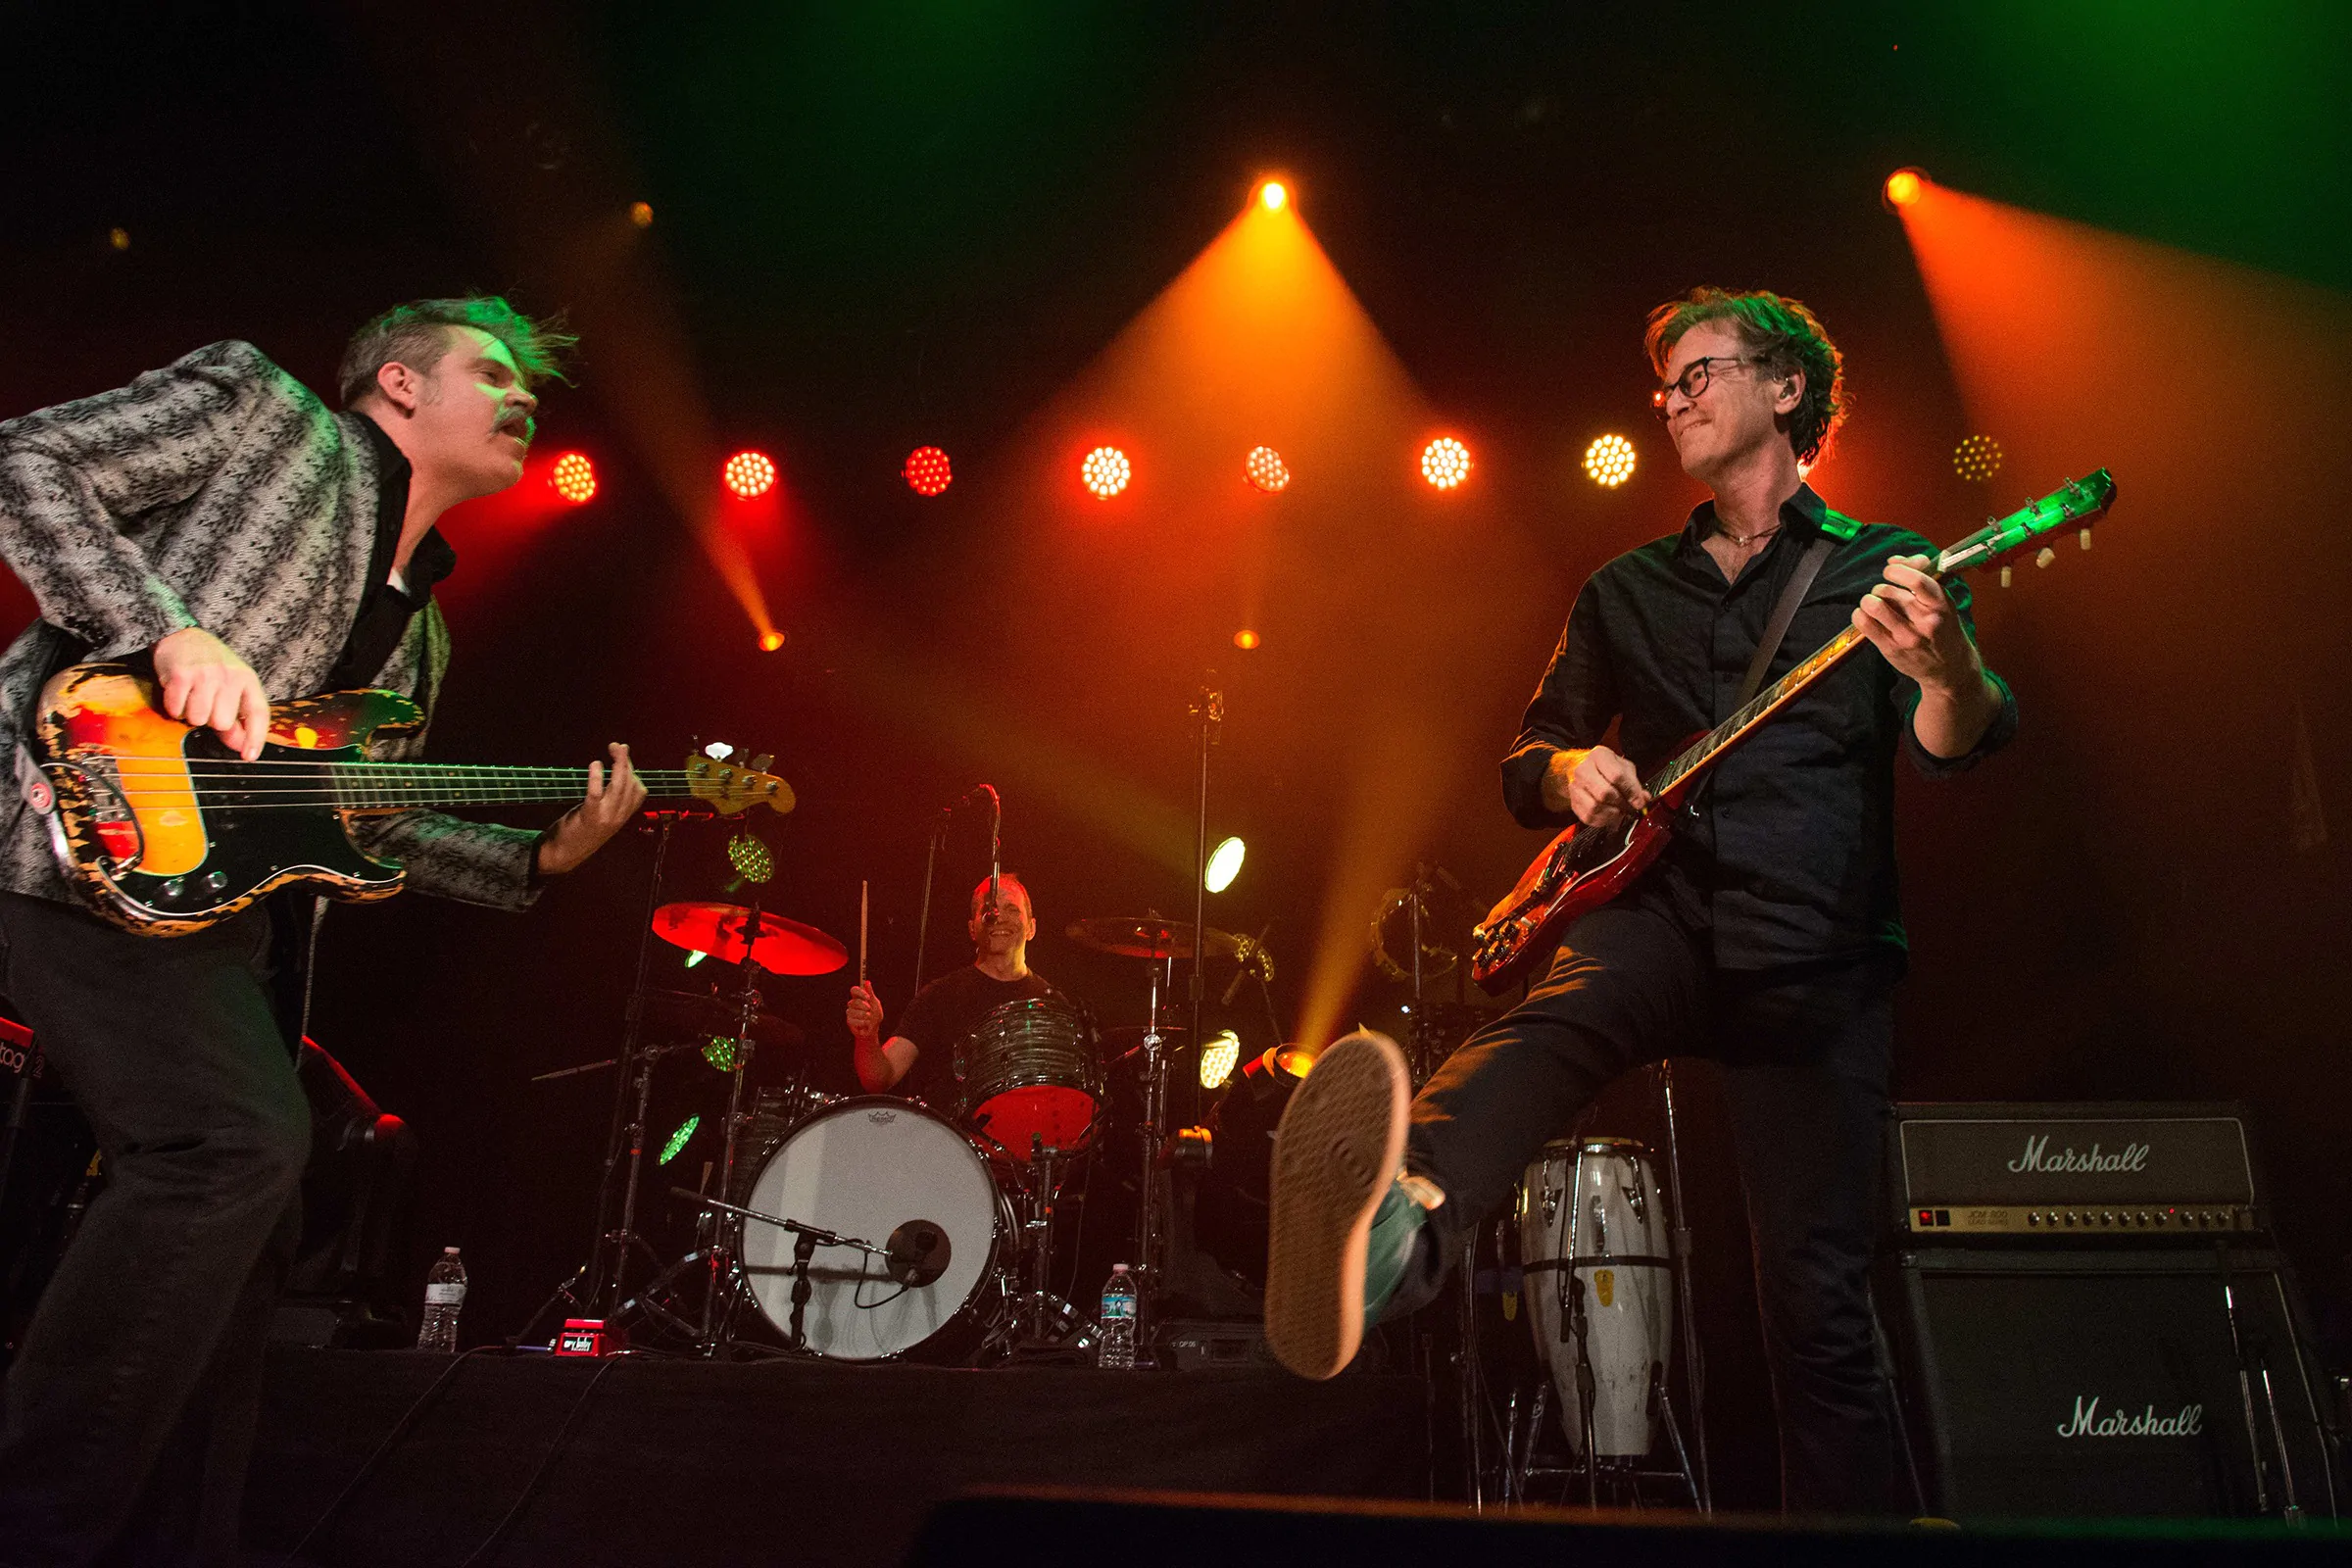 SEMISONIC release official video for ‘You’re Not Alone’ their first single in nearly 20 years